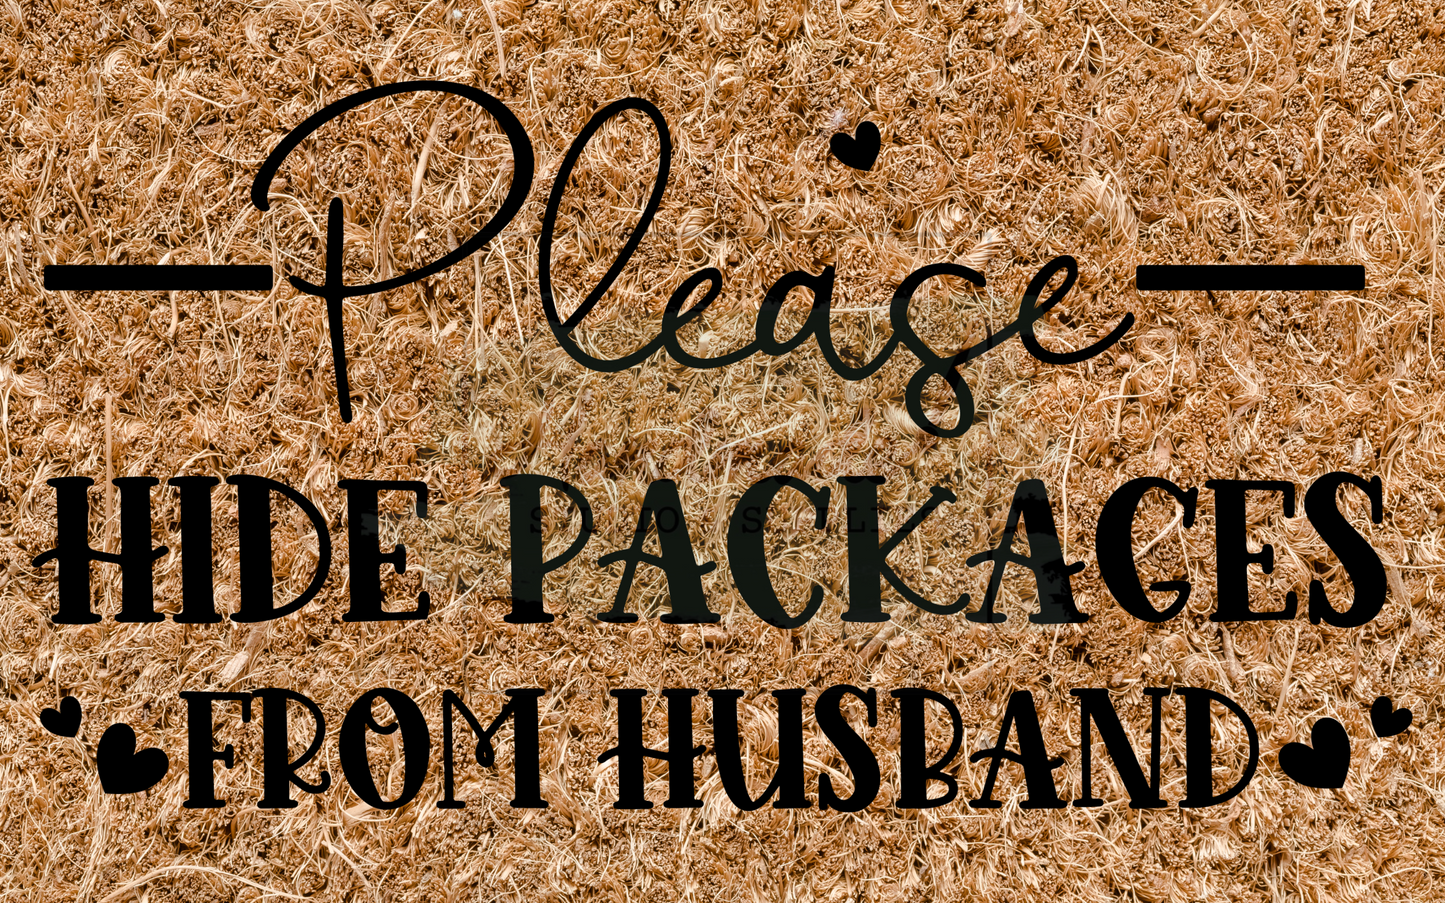 Please hide packages from husband - hearts